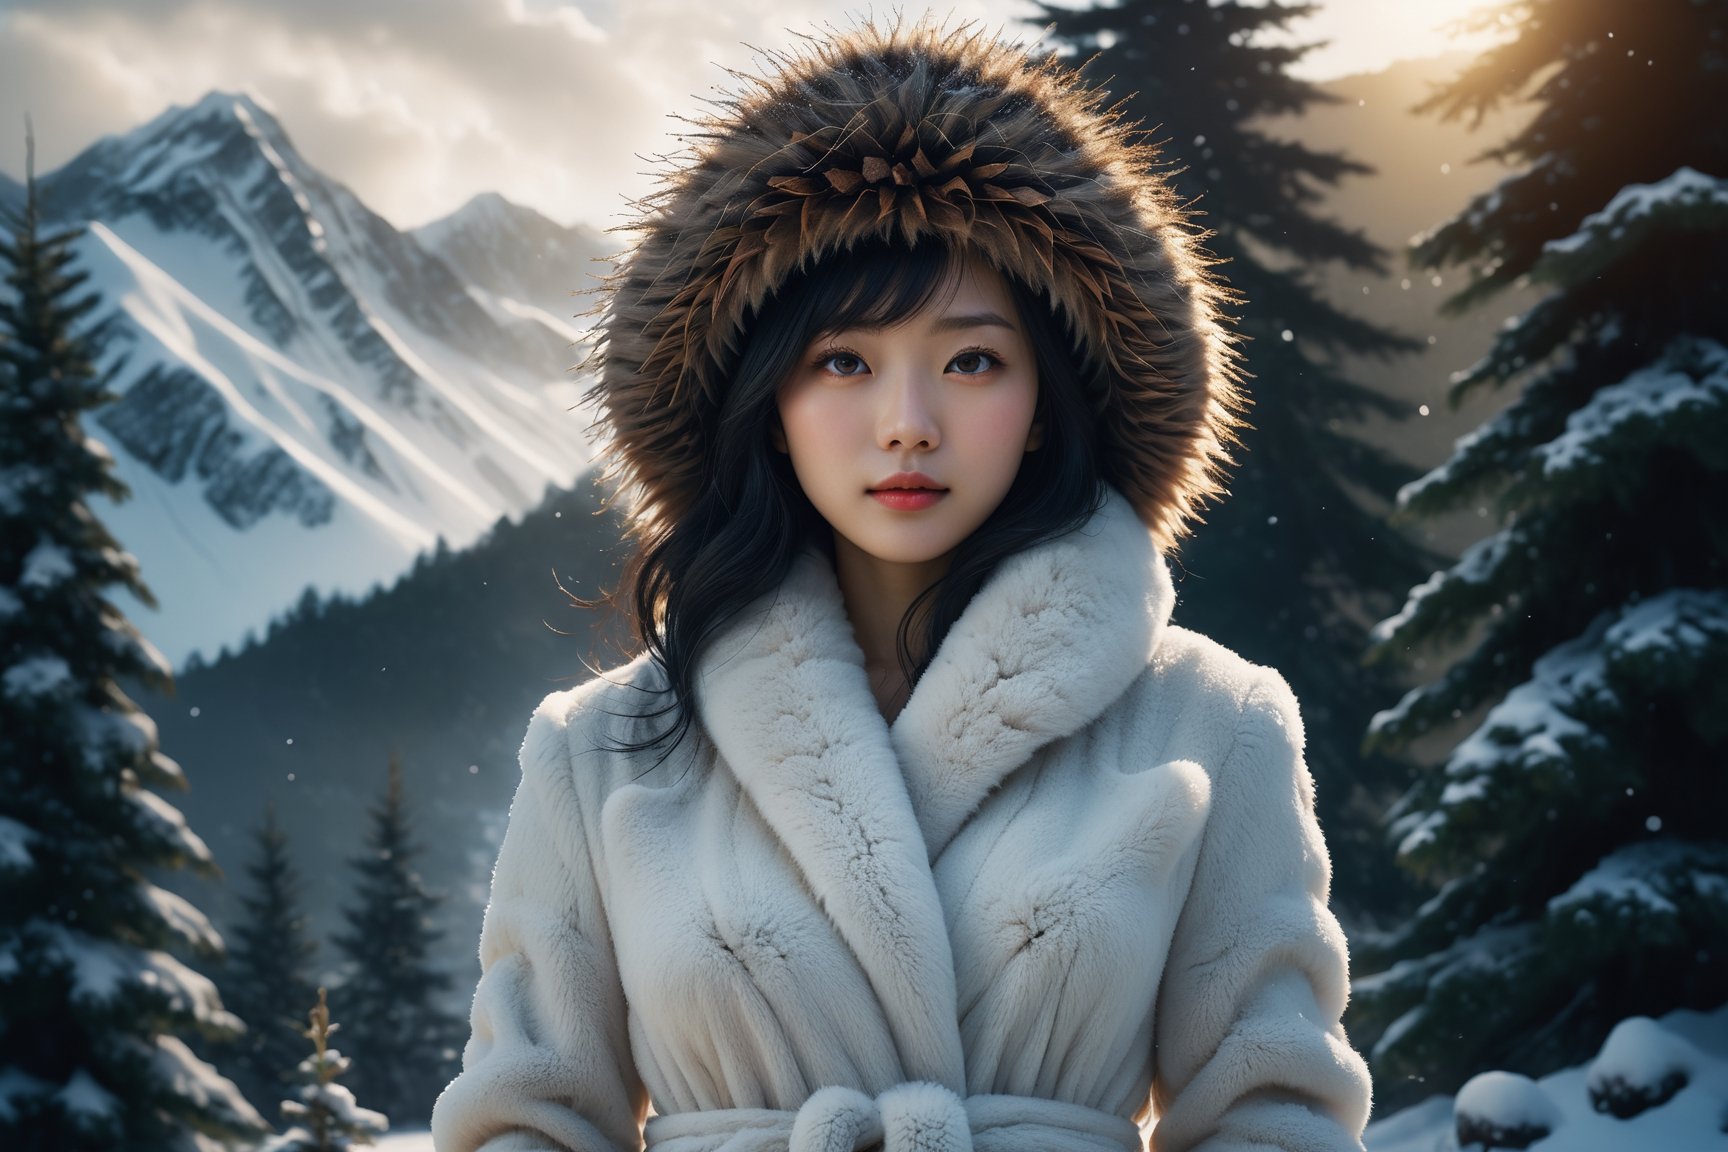 HONG KONG Girl ((September Ai)) ,  short messy hair, 

Stunning and beautiful Japanese super model, wearing white fur long coat on the naked body and fur hat, standing on the snow fileld Full-body wide shot, 18mm lens, zoom out, clouds, mist, outdoors, snowing, only 1pine tree 8k resolution, hyperrealism photo, concept art of detailed character design, cinema concept, cinematic lighting, expression and untamed, stylish, elegant, breathtaking, mysterious, fascinating, curiously complete face, elegant, gorgeous, cinematic look, calming tones, incredible details, intricate details, hyper detail, Fuji Superia 400, warm tones, lens flare, depth of field, bokeh effect, backlit, light leak, by Esao Andrews style, by Rutkowski Repin artstation style, by Wadim Kashin style, by Konstantin Razumov style, by Tim burton style, dark gothic style Ayase Haruka's face ,aesthetic portrait,Movie Still,korean girl
